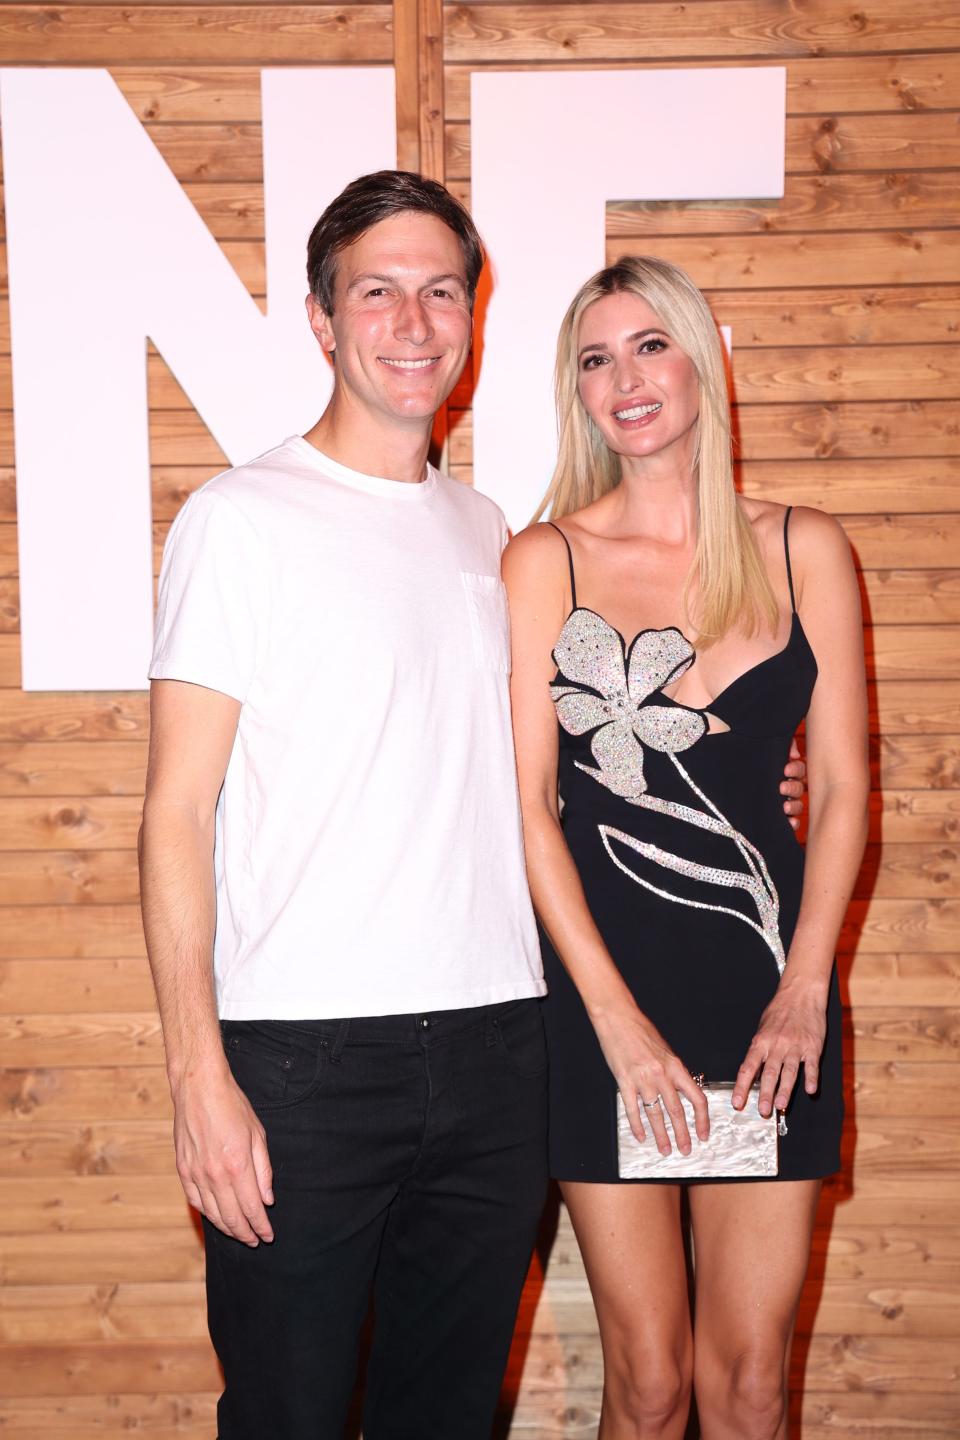 Ivanka Trump and Jared Kushner at an event in Miami in 2022